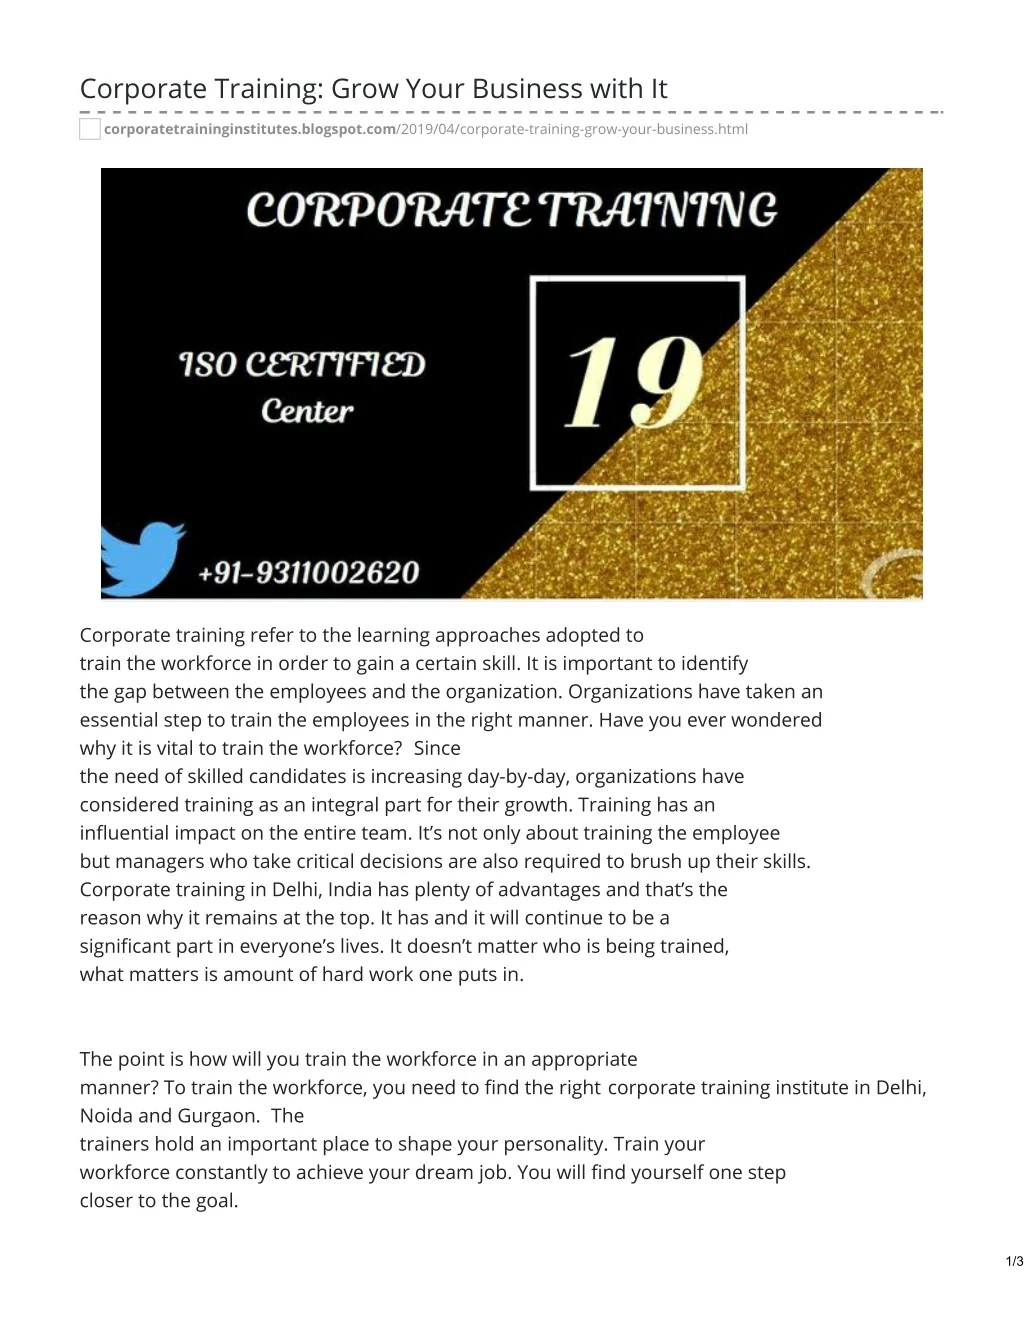 corporate training grow your business with it